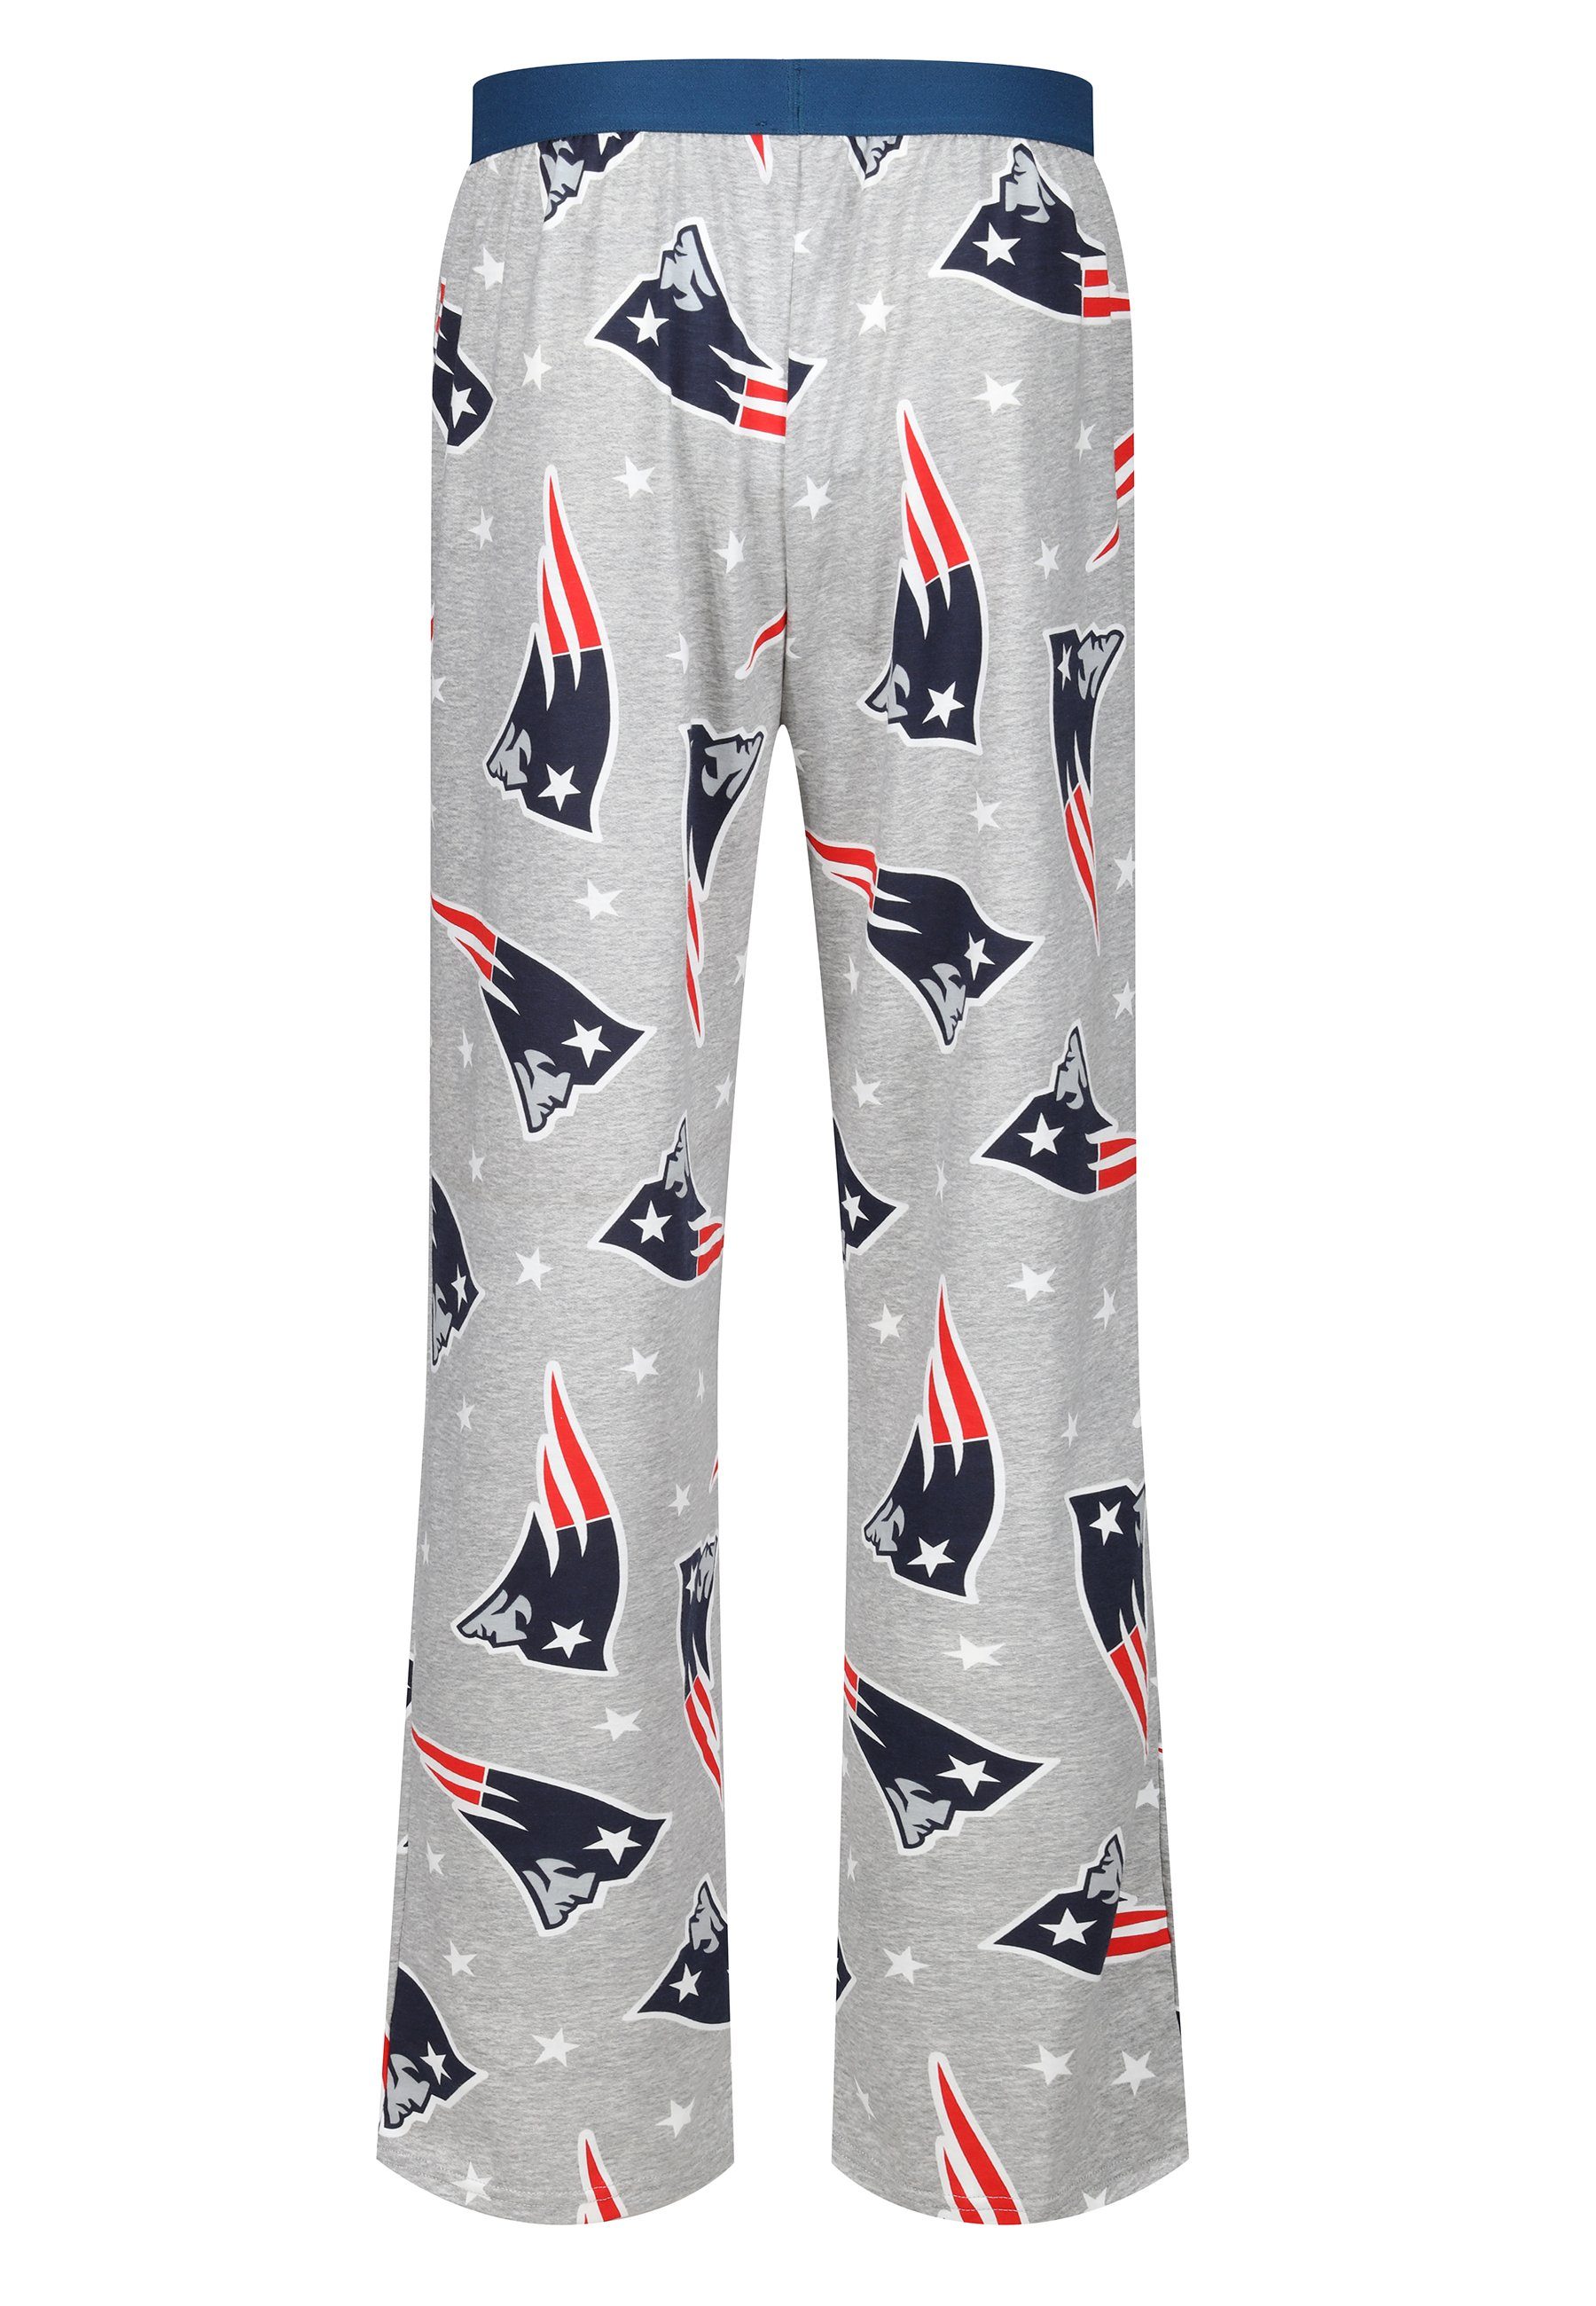 Recovered Loungepants Loungepants Marl NFL England Patriots New and Stars Logo Grey